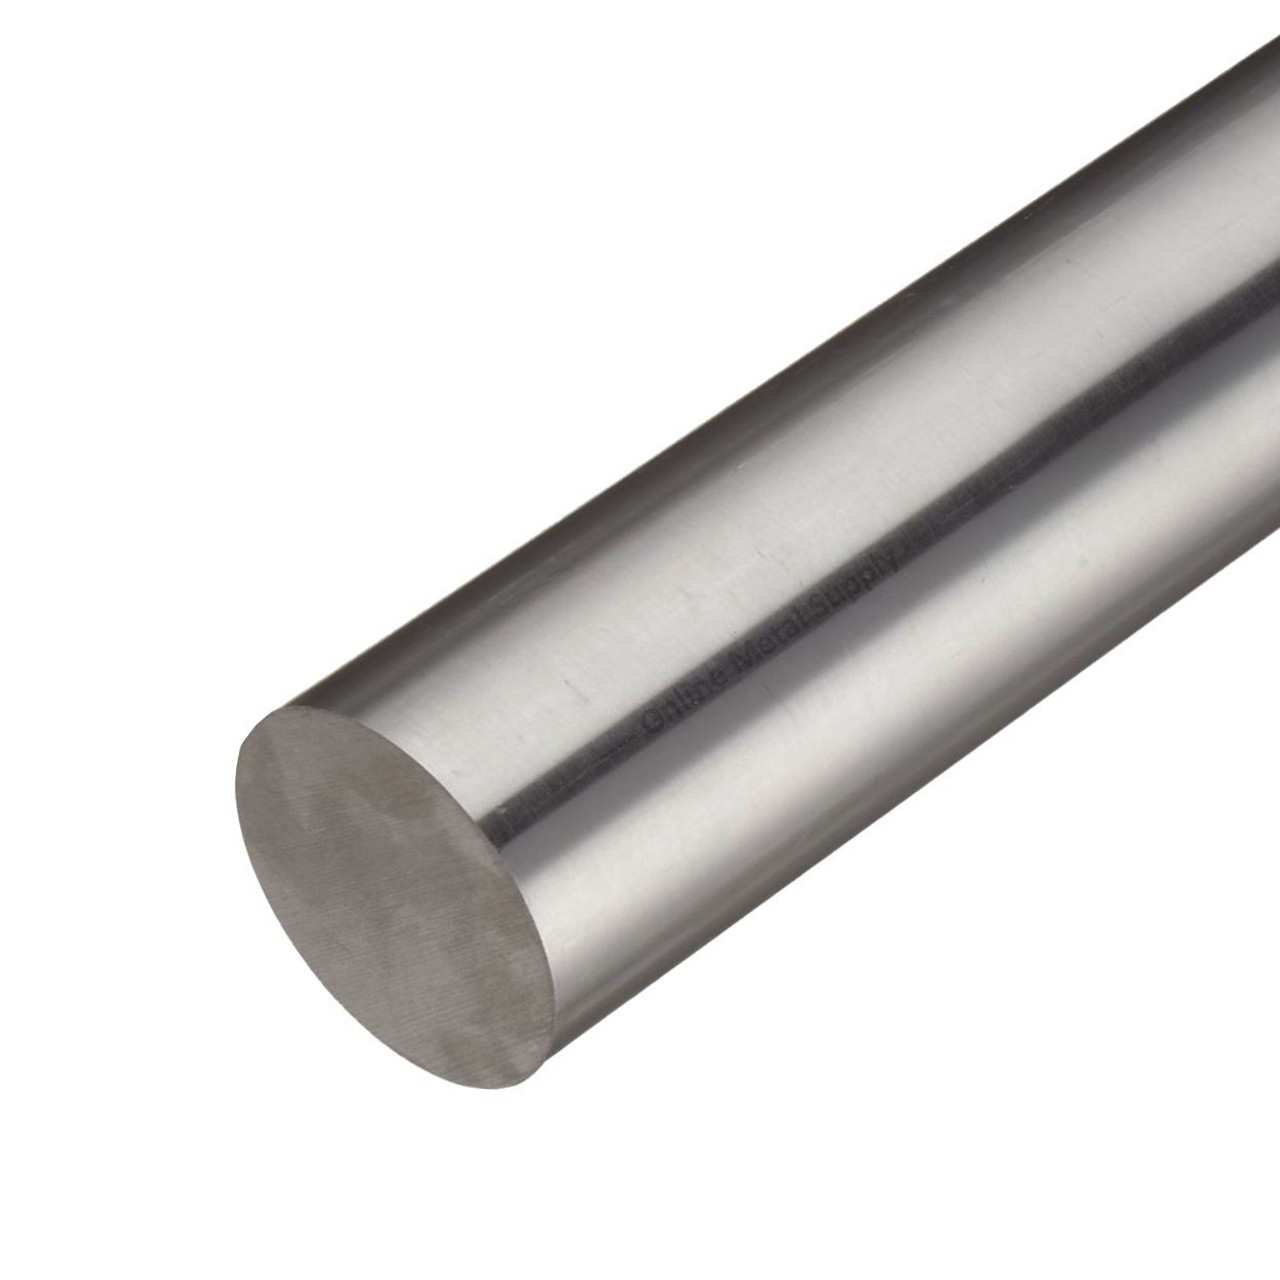 0.393 (10mm) x 48 inches, ETD 150 Alloy Steel Round Rod, Turned, Ground, Polished